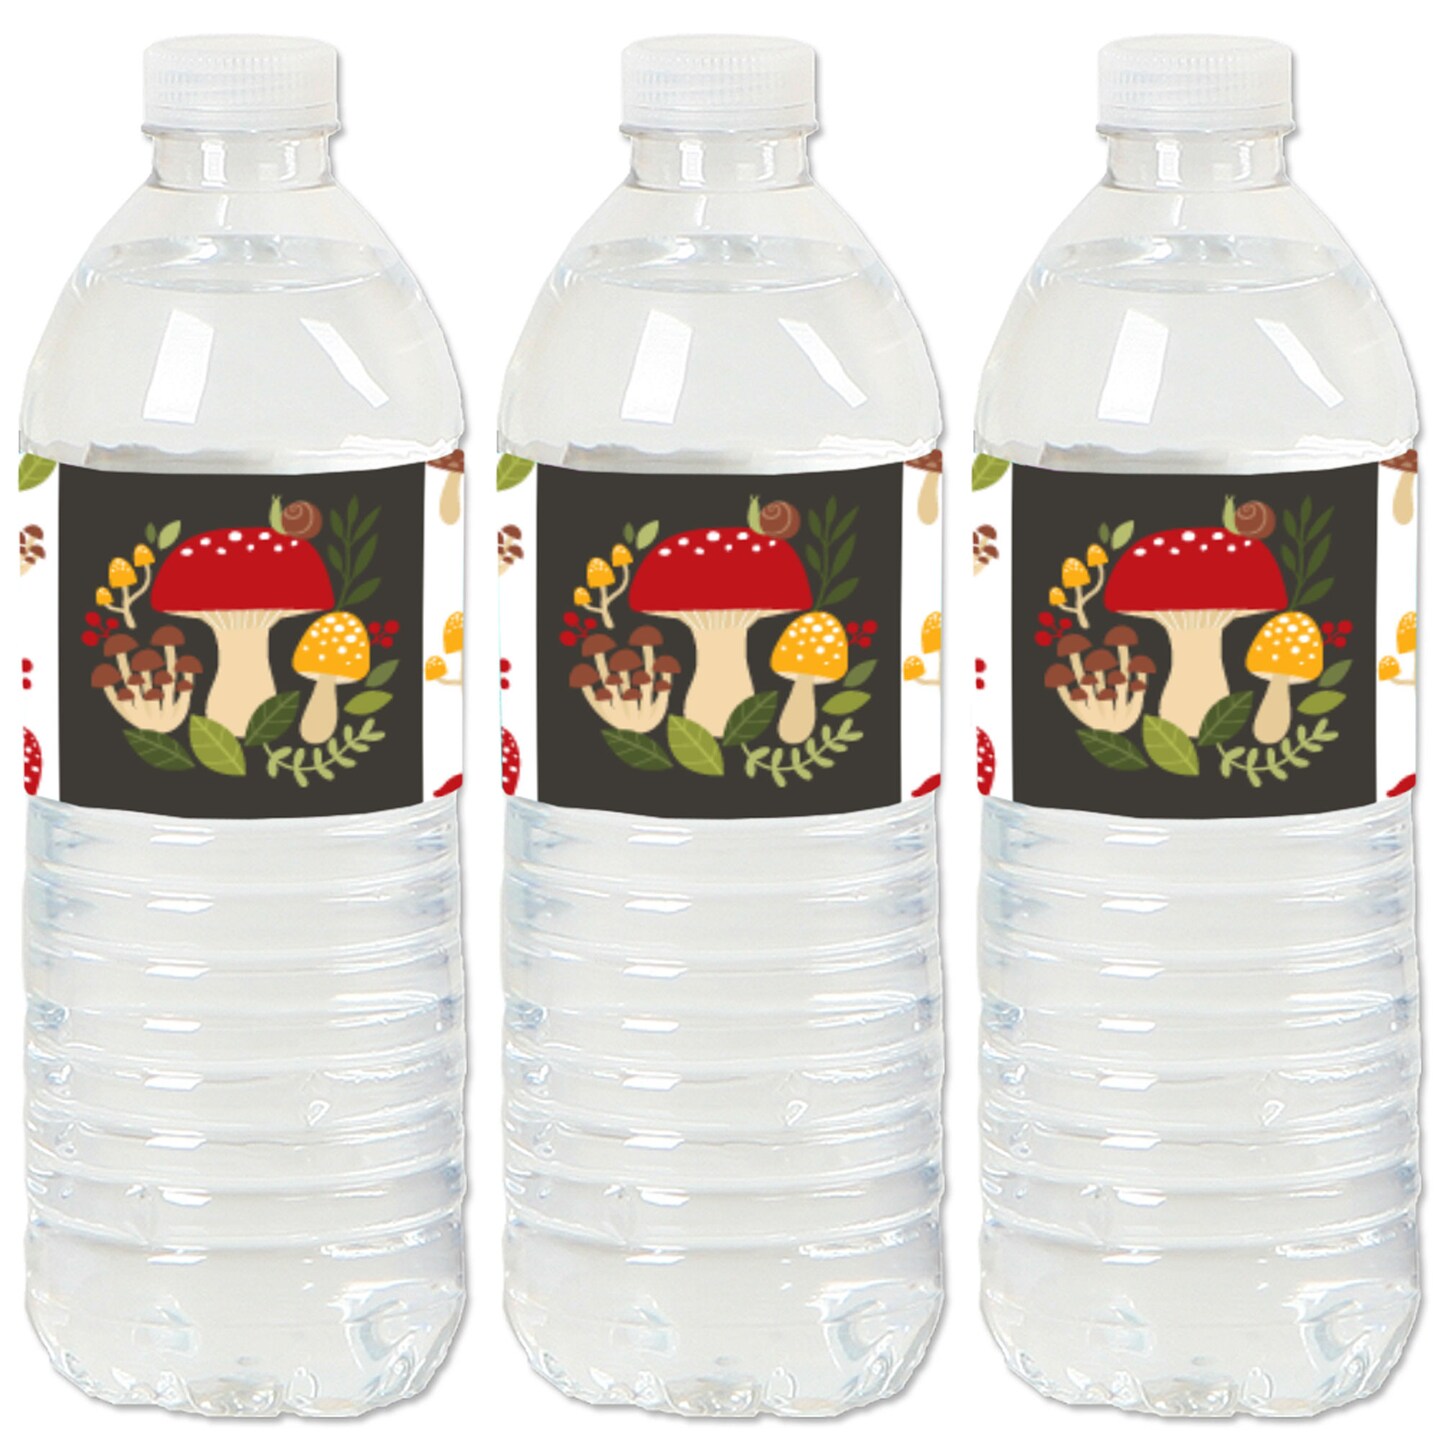 Big Dot of Happiness Wild Mushrooms - Red Toadstool Party Water Bottle Sticker Labels - Set of 20